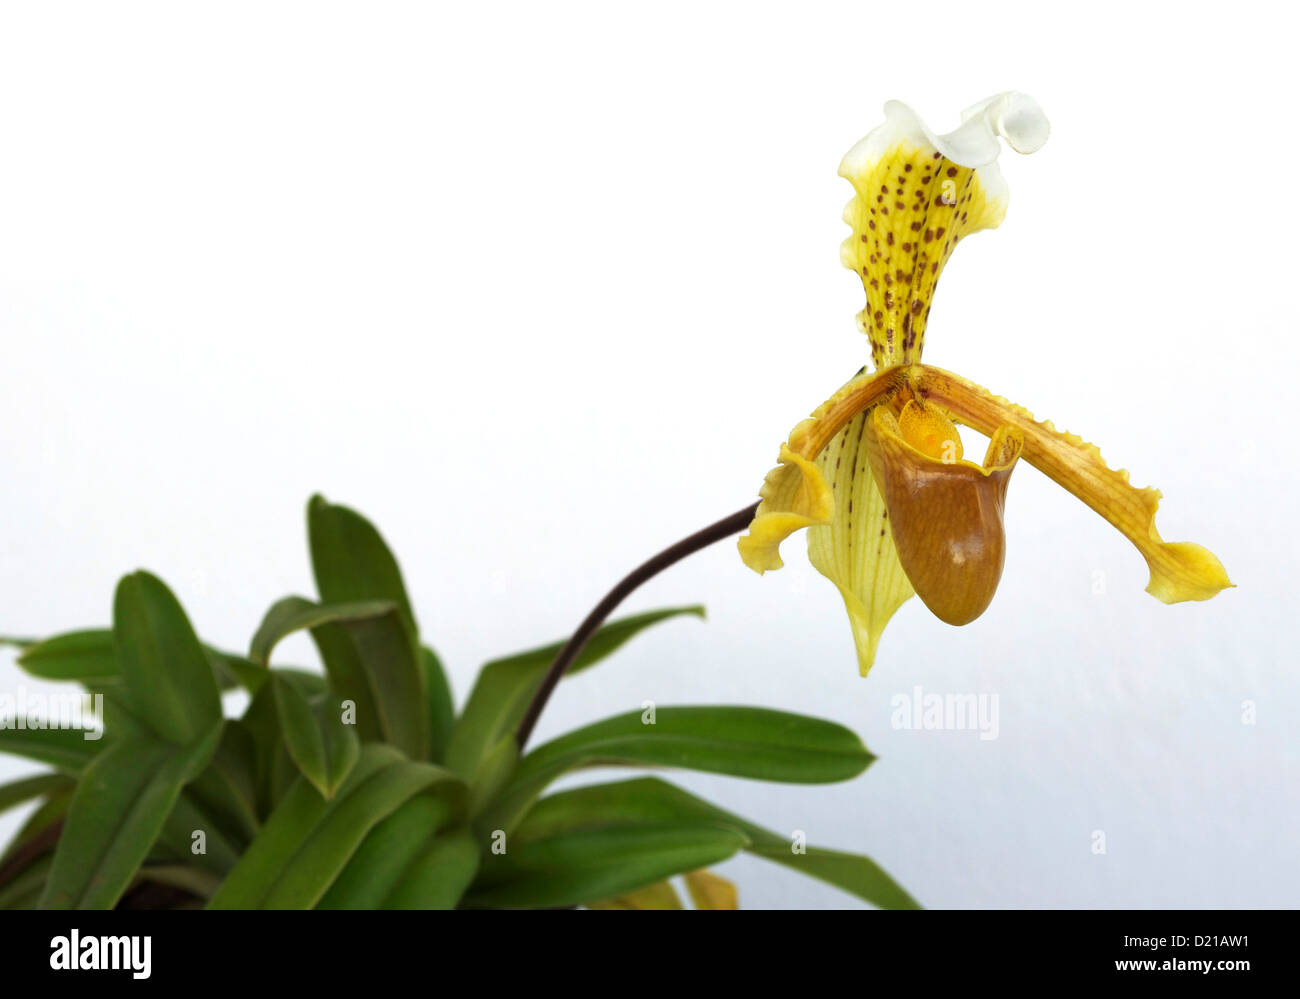 Paphiopedilum orchid commonly referred to as the “lady's-slippers” or “slipper orchids” on white background Stock Photo